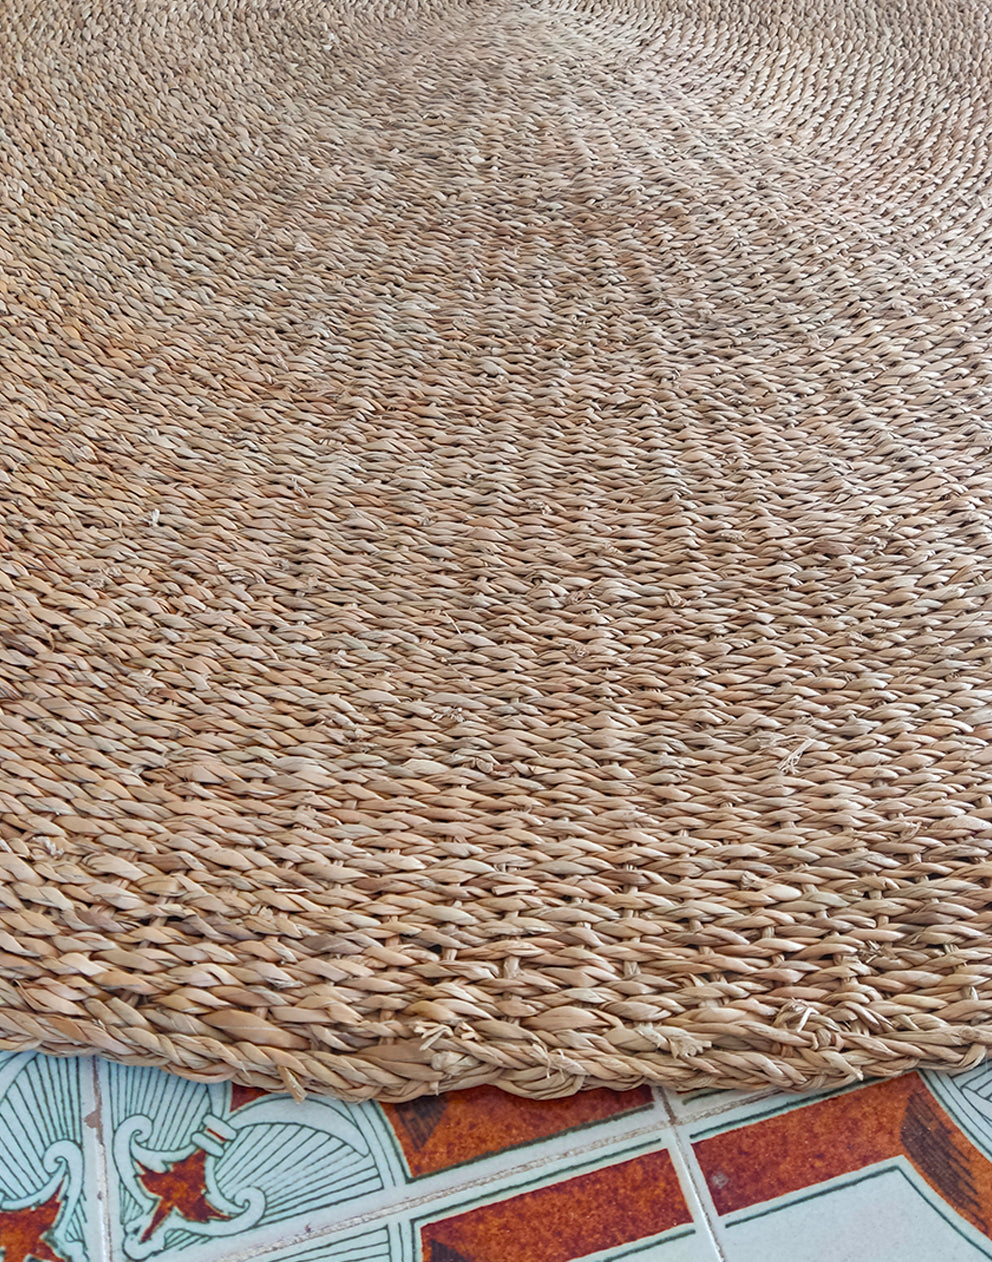 Large Round Seagrass Rug in Natural